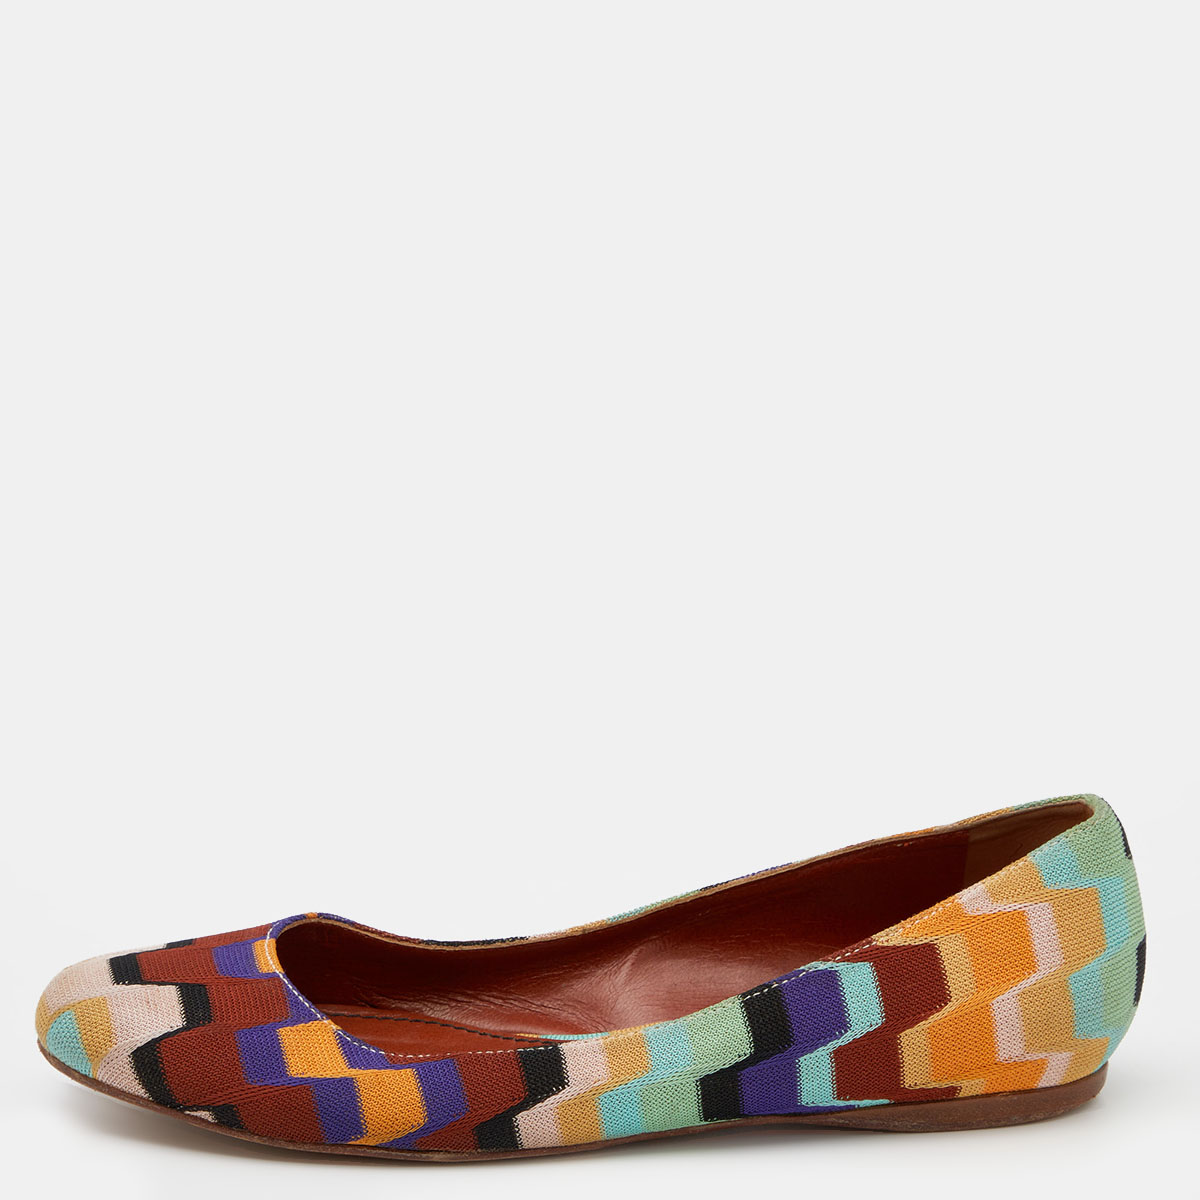 Pre-owned Missoni Multicolor Knit Fabric Ballet Flats Size 36